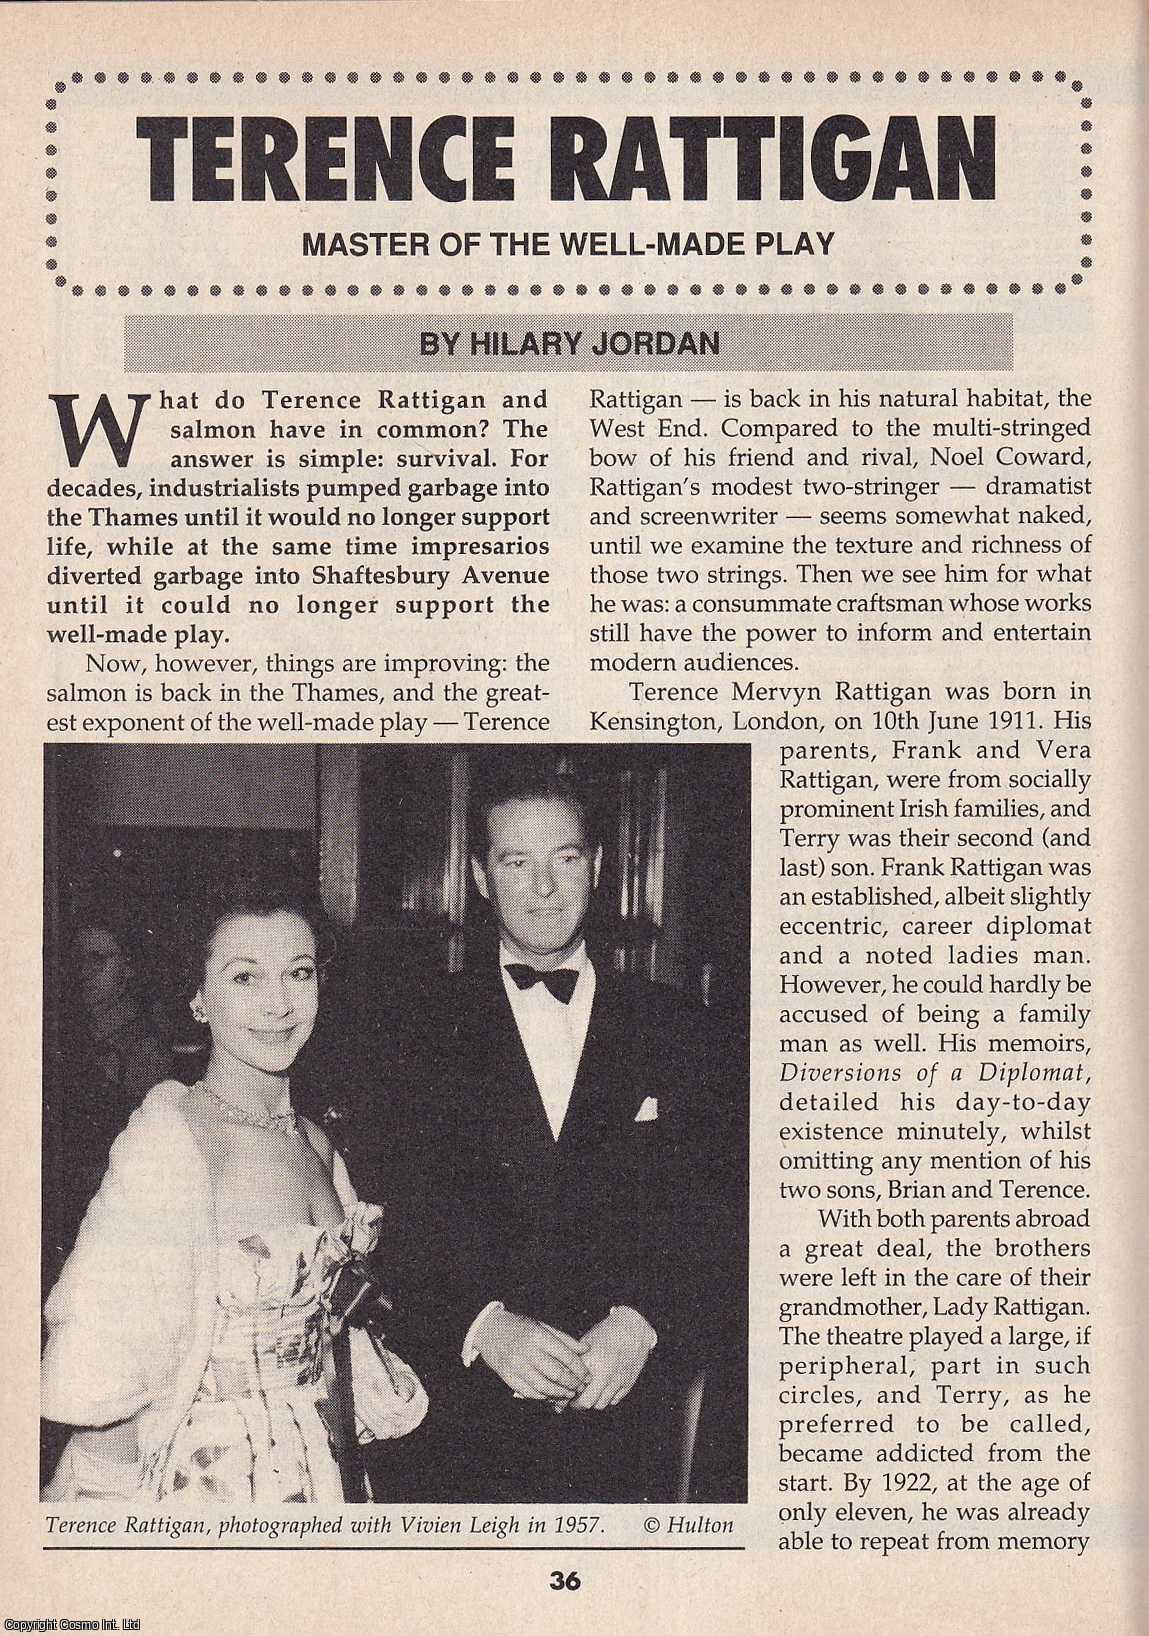 Hilary Jordan - Terence Rattigan. Master of The Well Made Play. This is an original article separated from an issue of The Book & Magazine Collector publication, 1995.